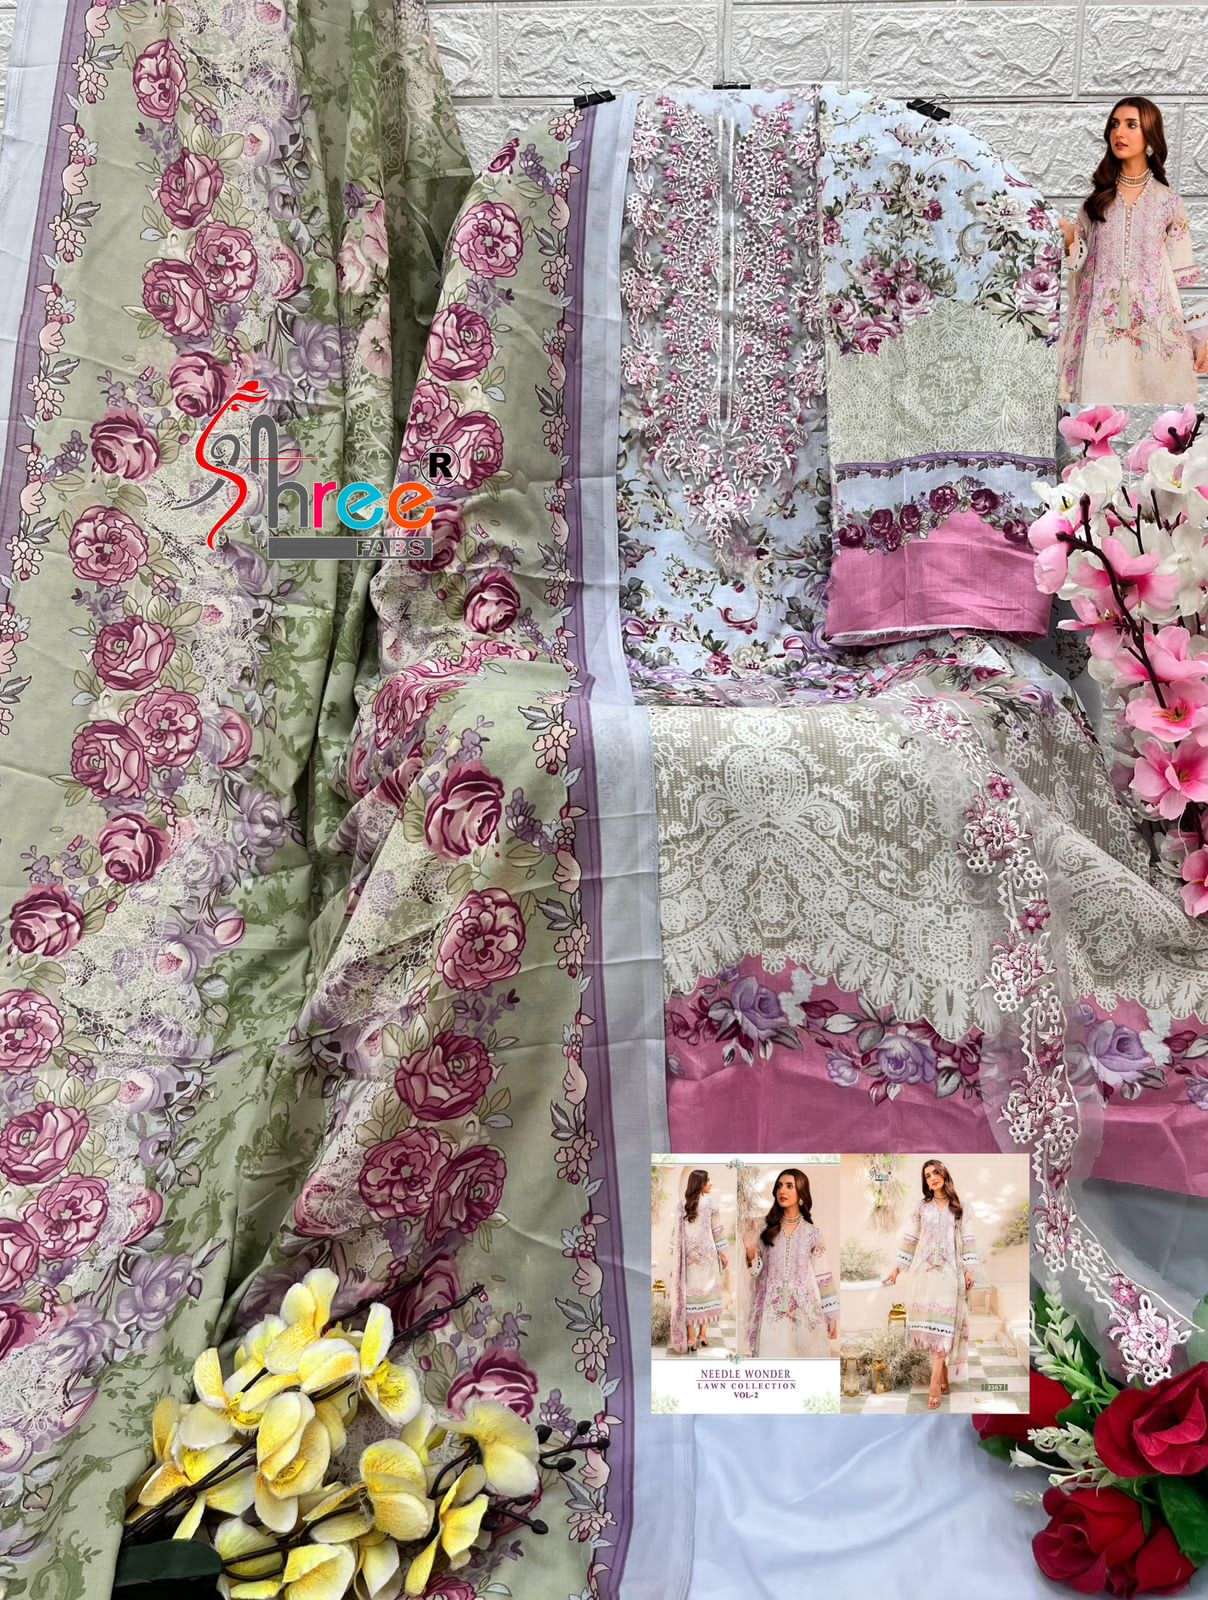 SHREE FABS NEEDLE WONDER LAWN COLLECTION VOL 2